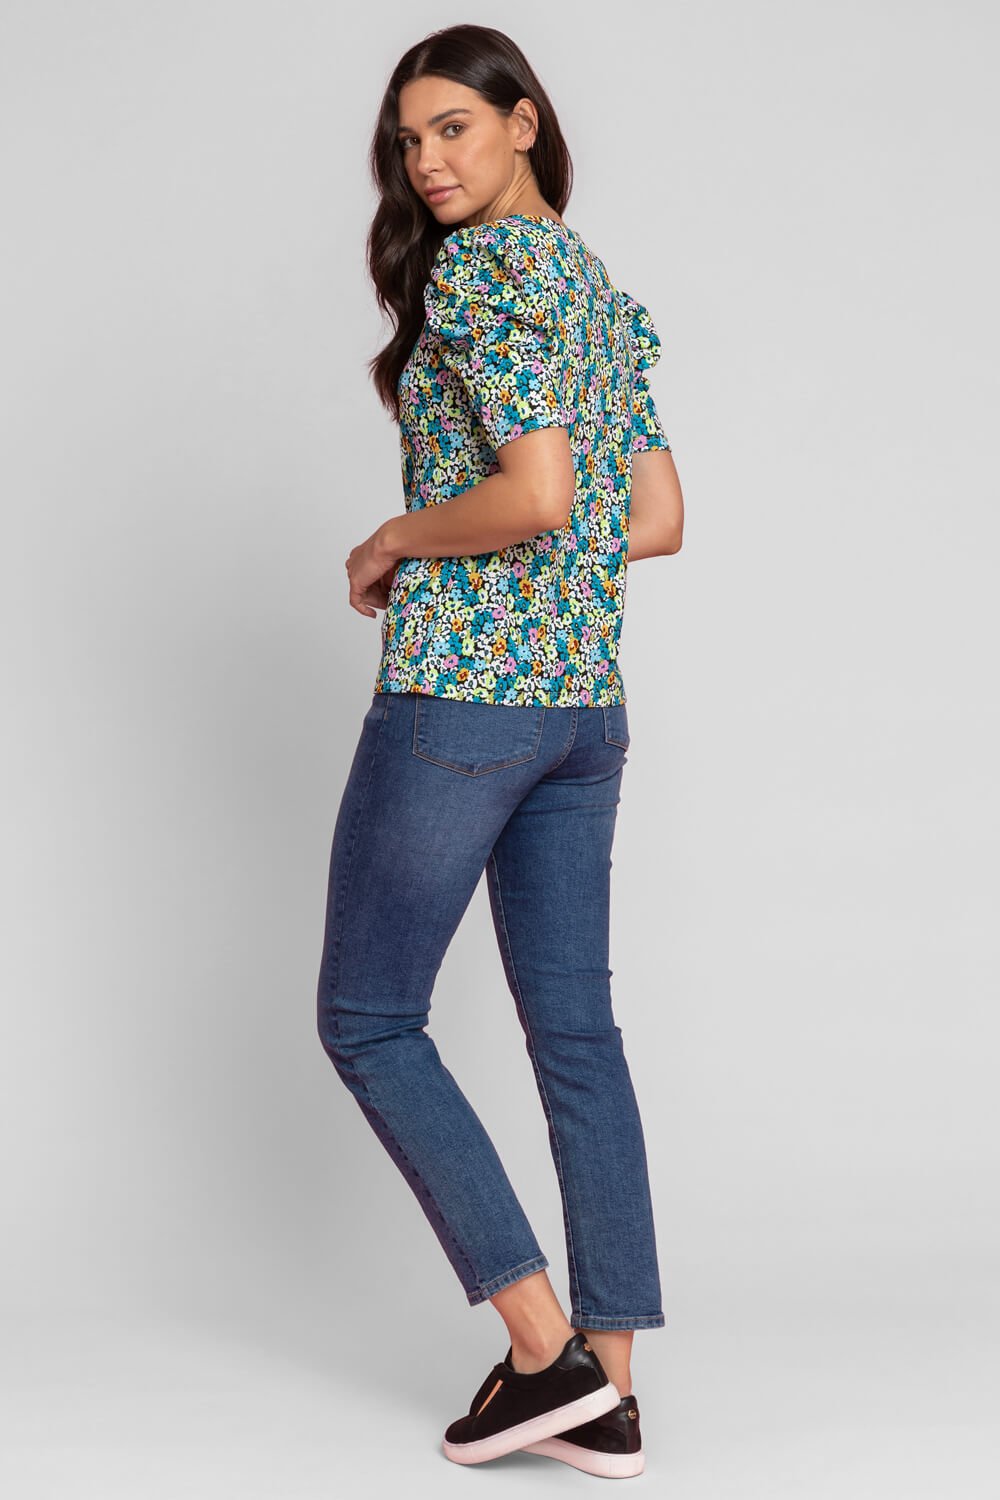 Turquoise Floral Print Puff Sleeve T-Shirt, Image 4 of 5